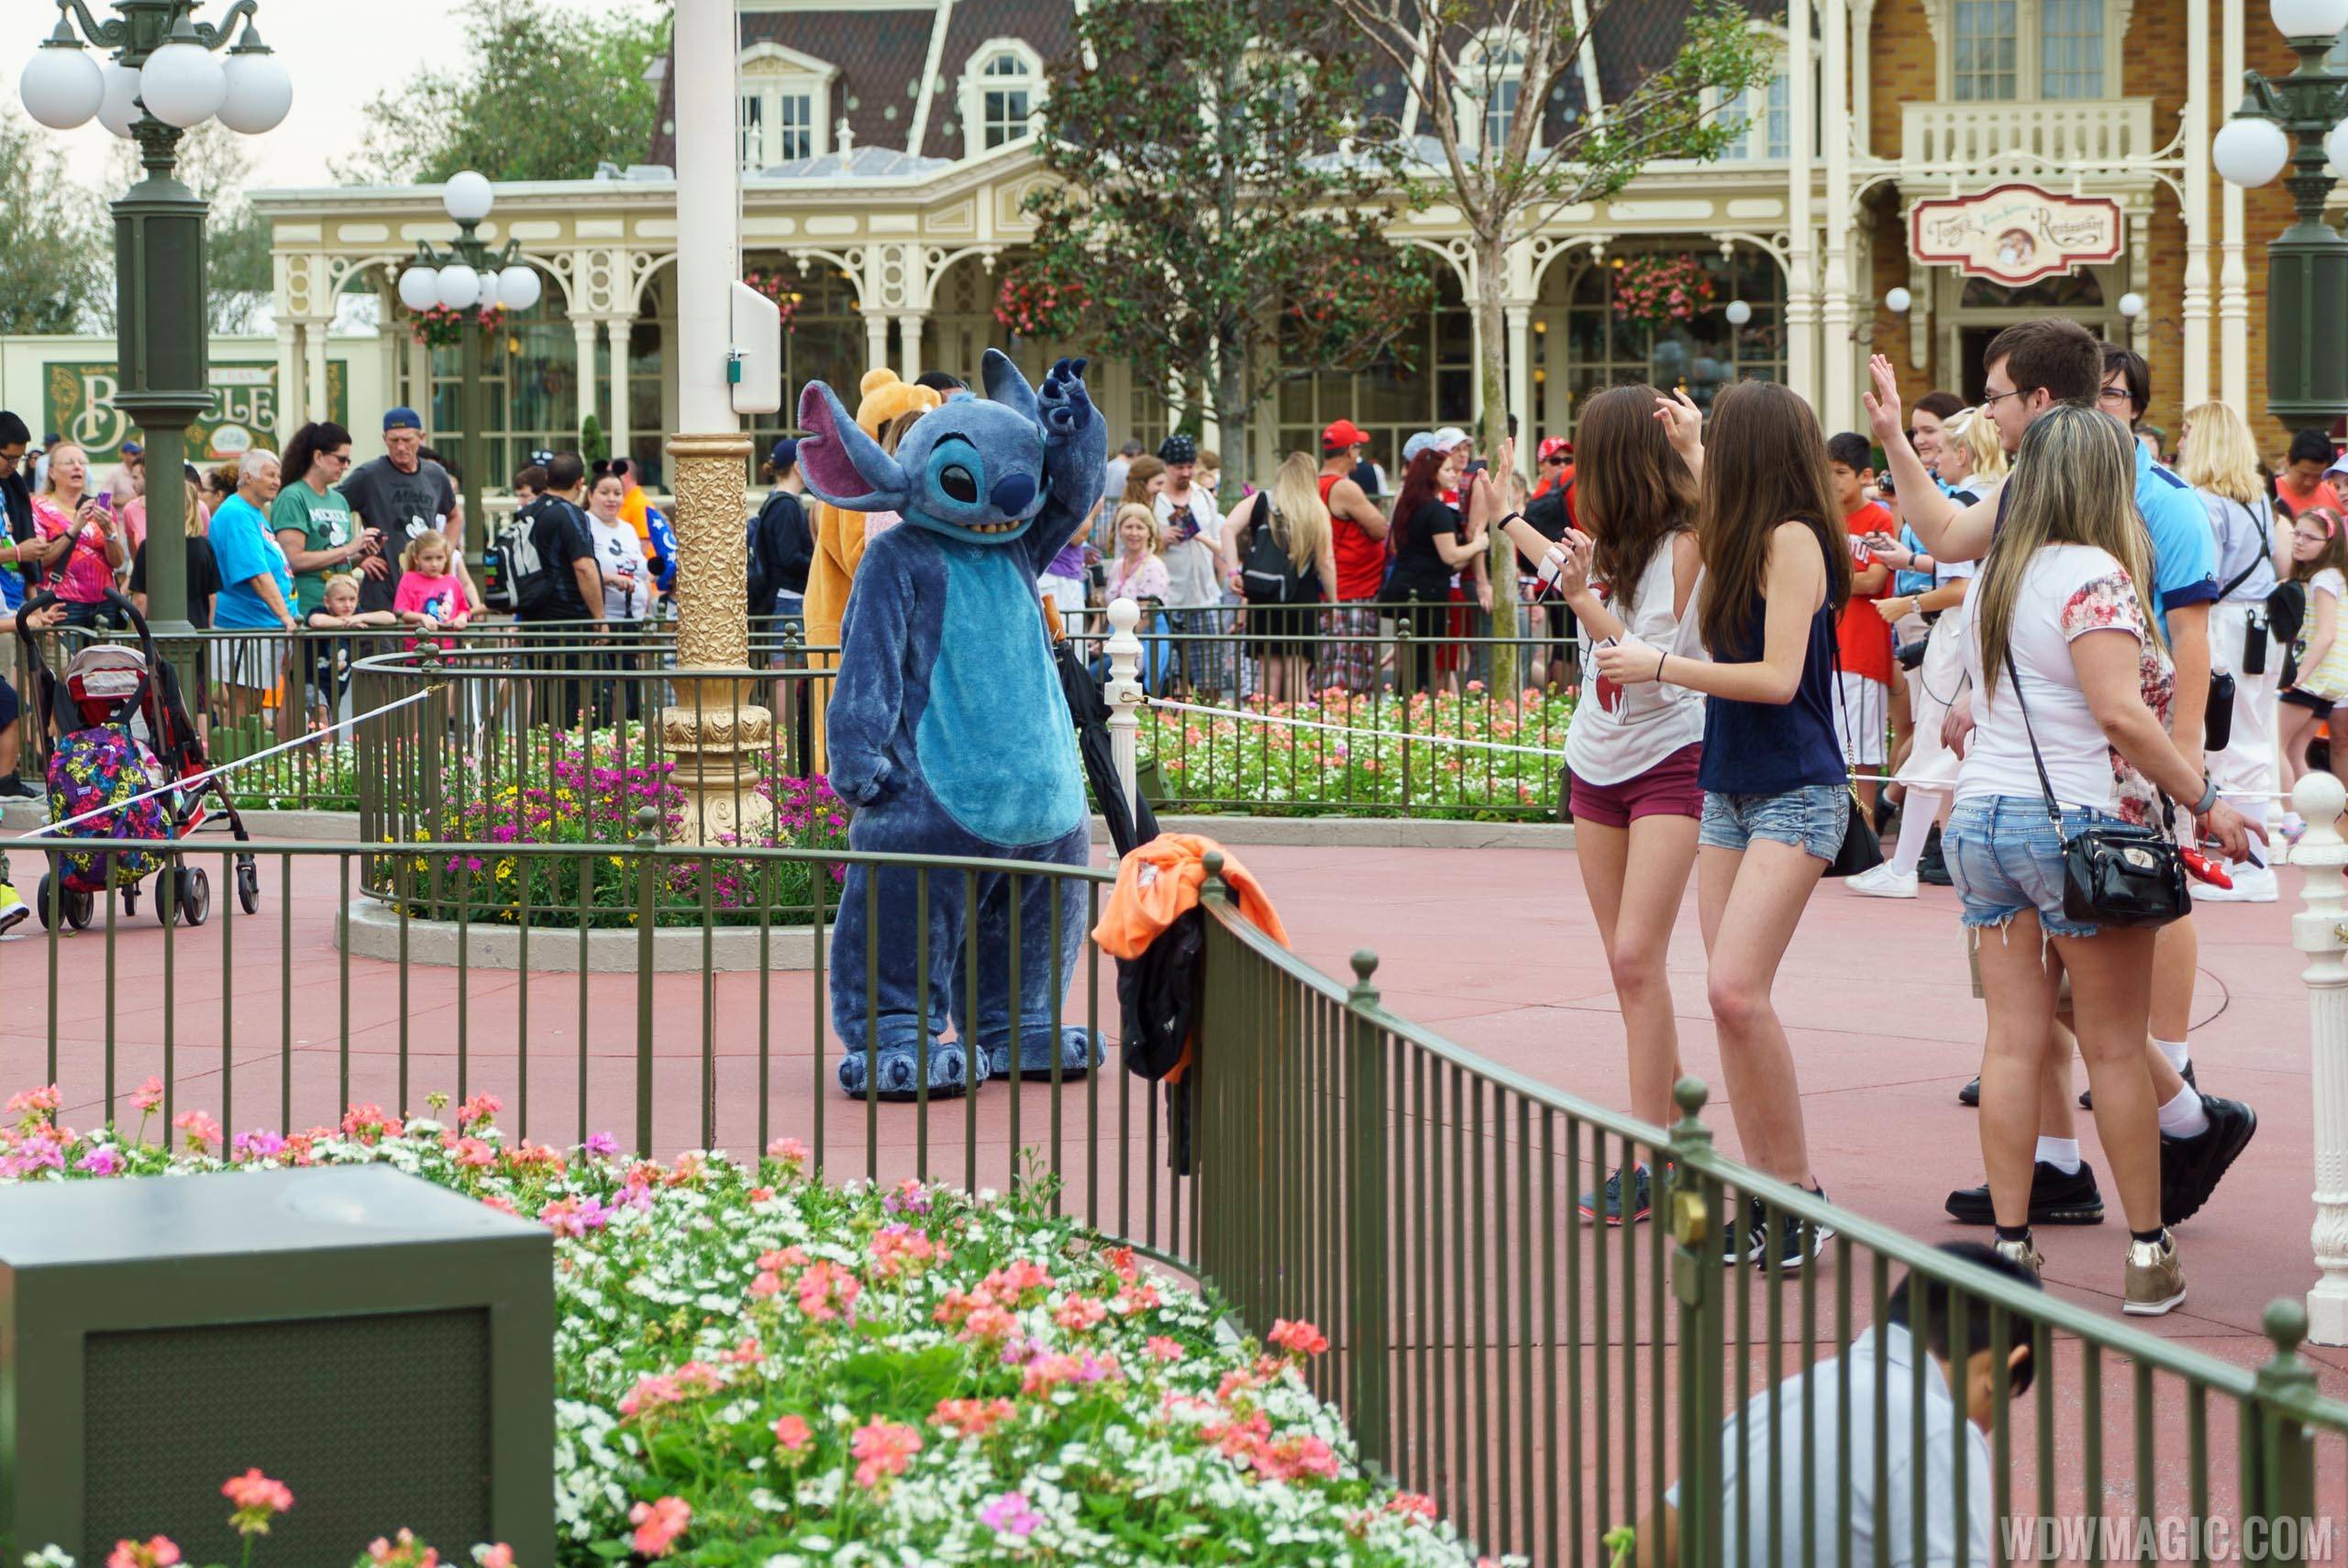 Stitch meet and greet in Town Square at the Magic Kingdom